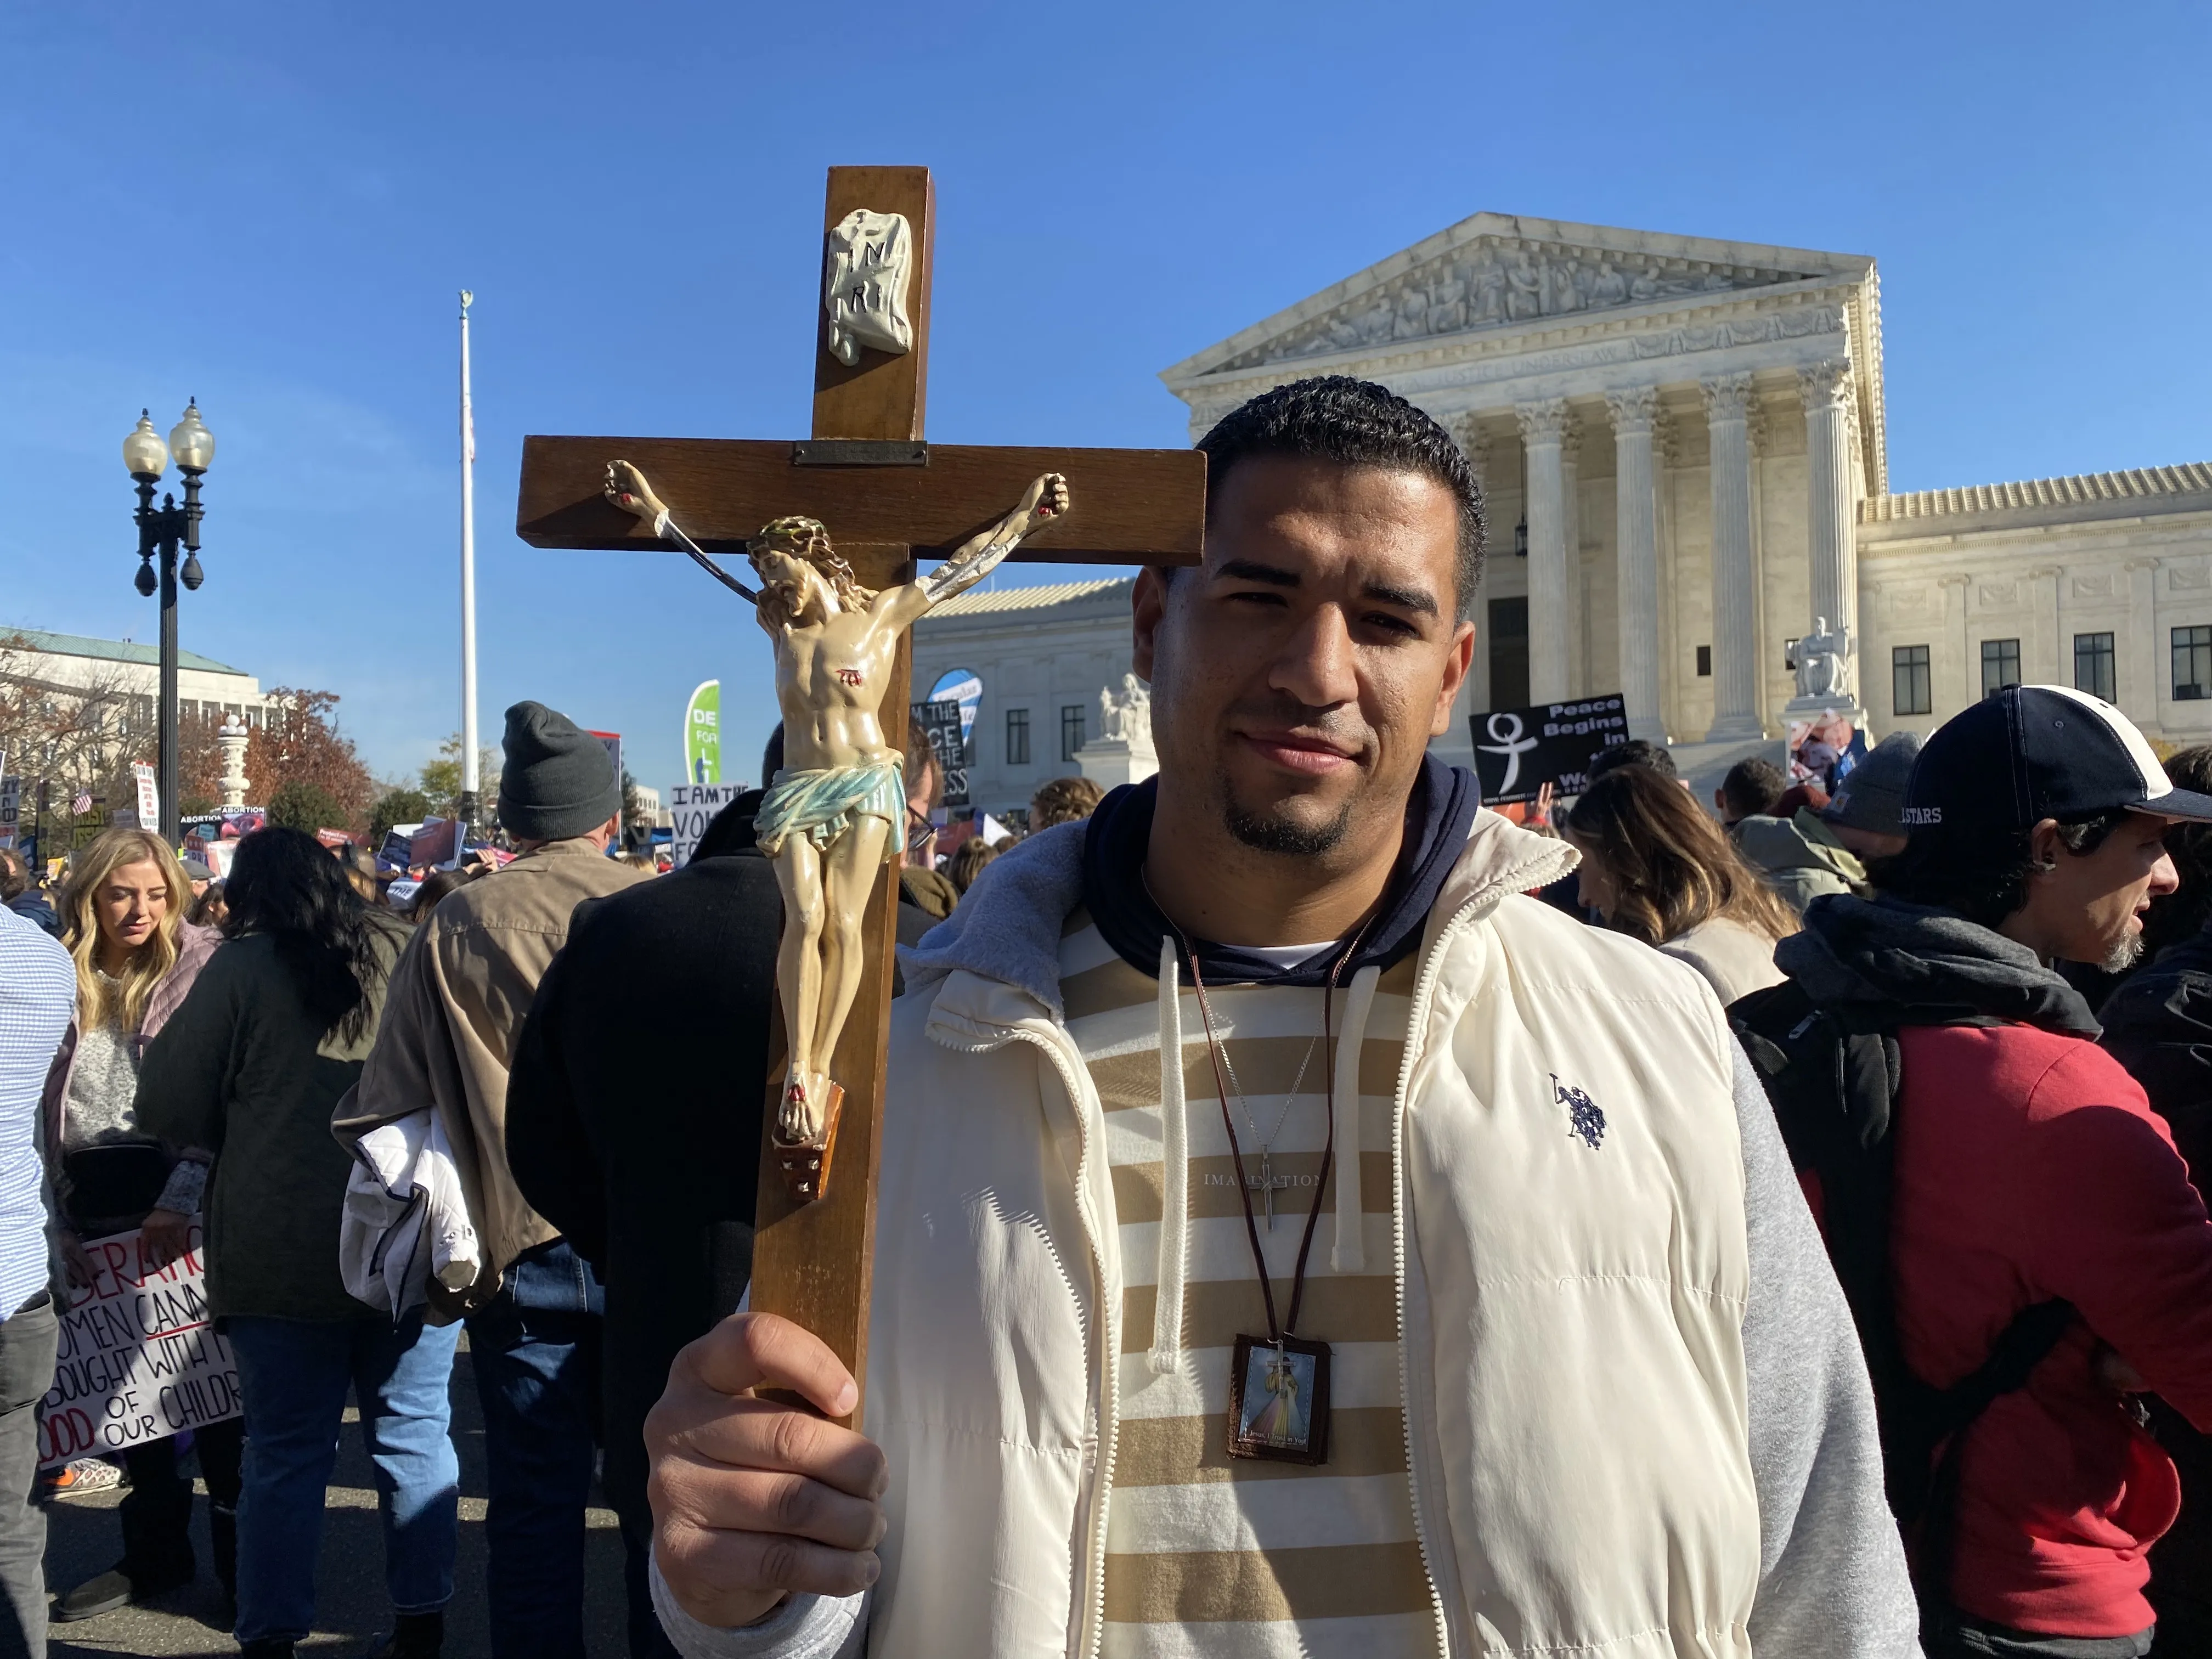 Juanito Estevez, from Freeport, a village on Long Island, New York, at a pro-life rally outside the U.S. Supreme Court on Dec. 1, 2021. Katie Yoder/CNA